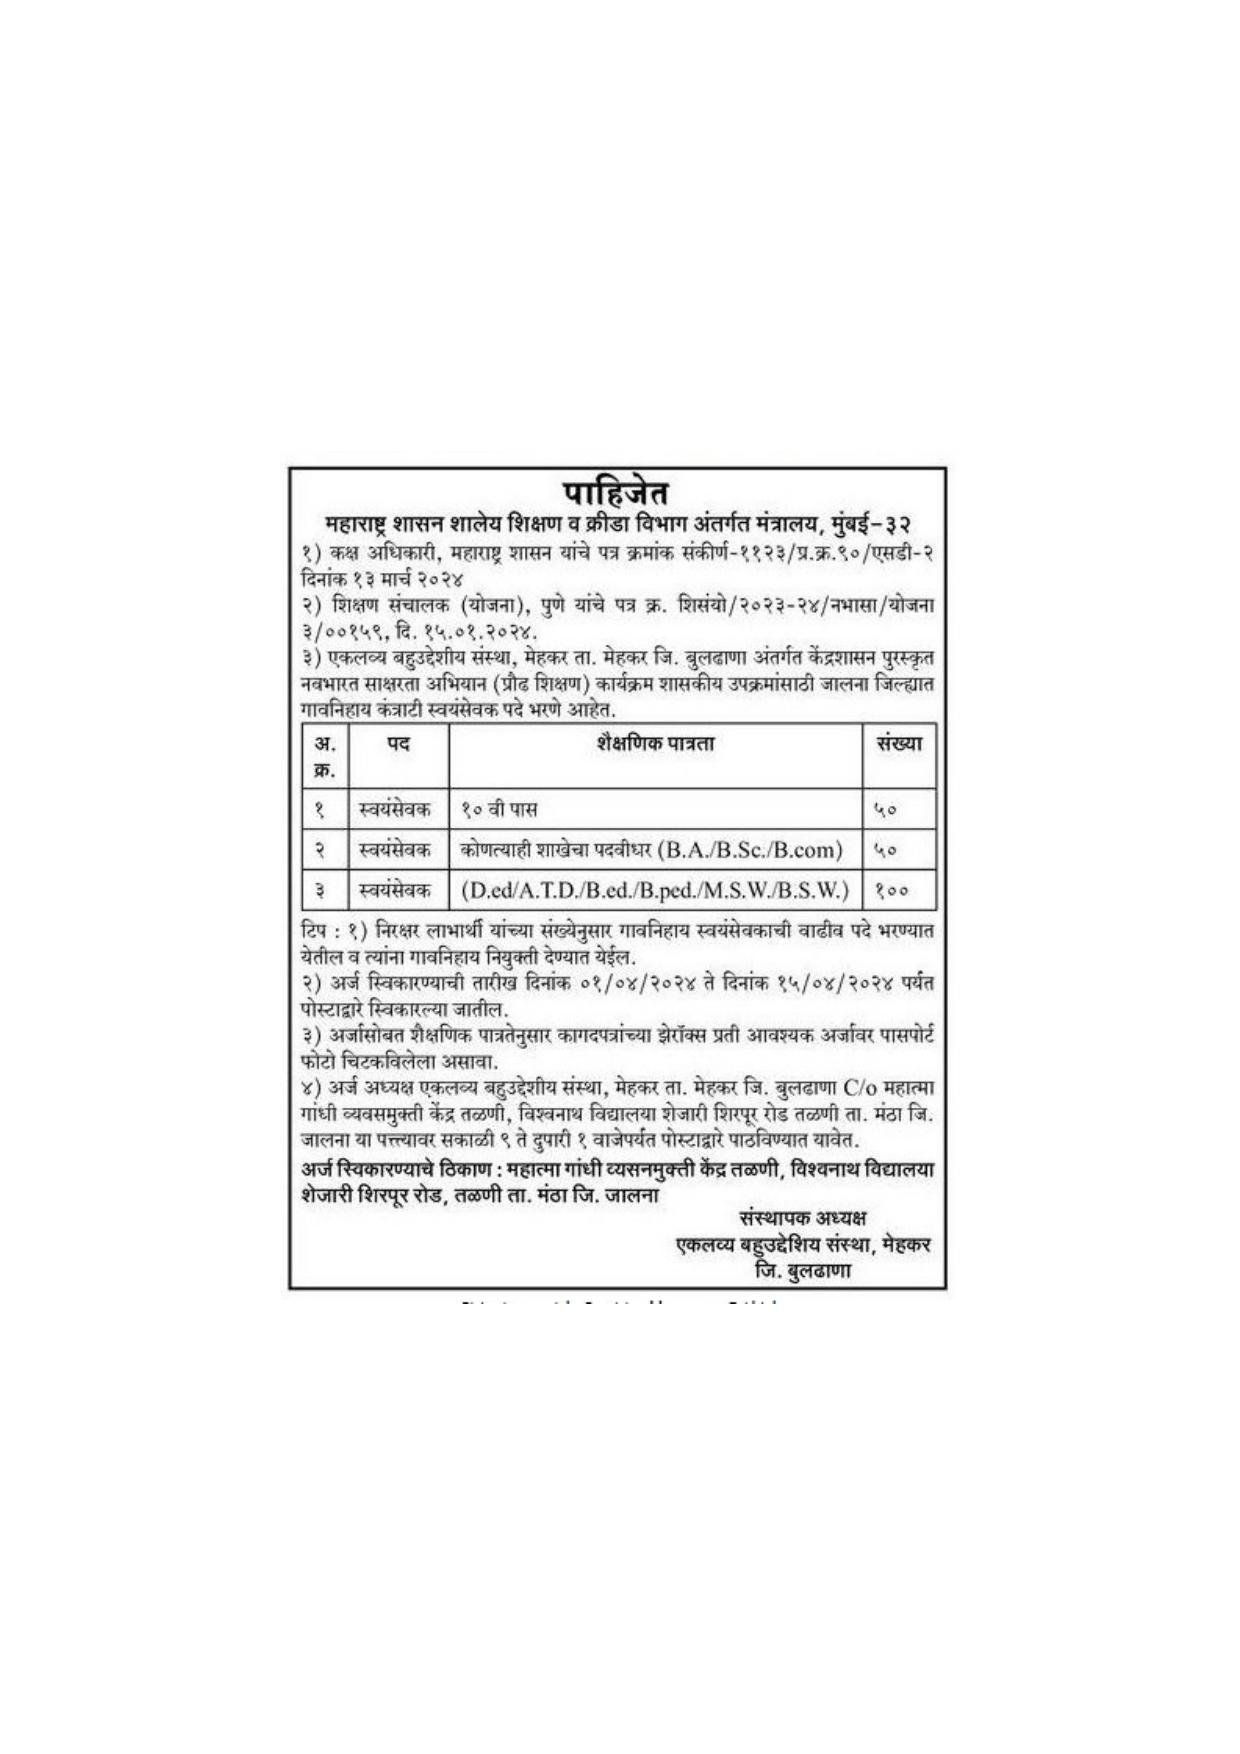 School Education Department Maharashtra Recruitment for 200 Posts - Page 1